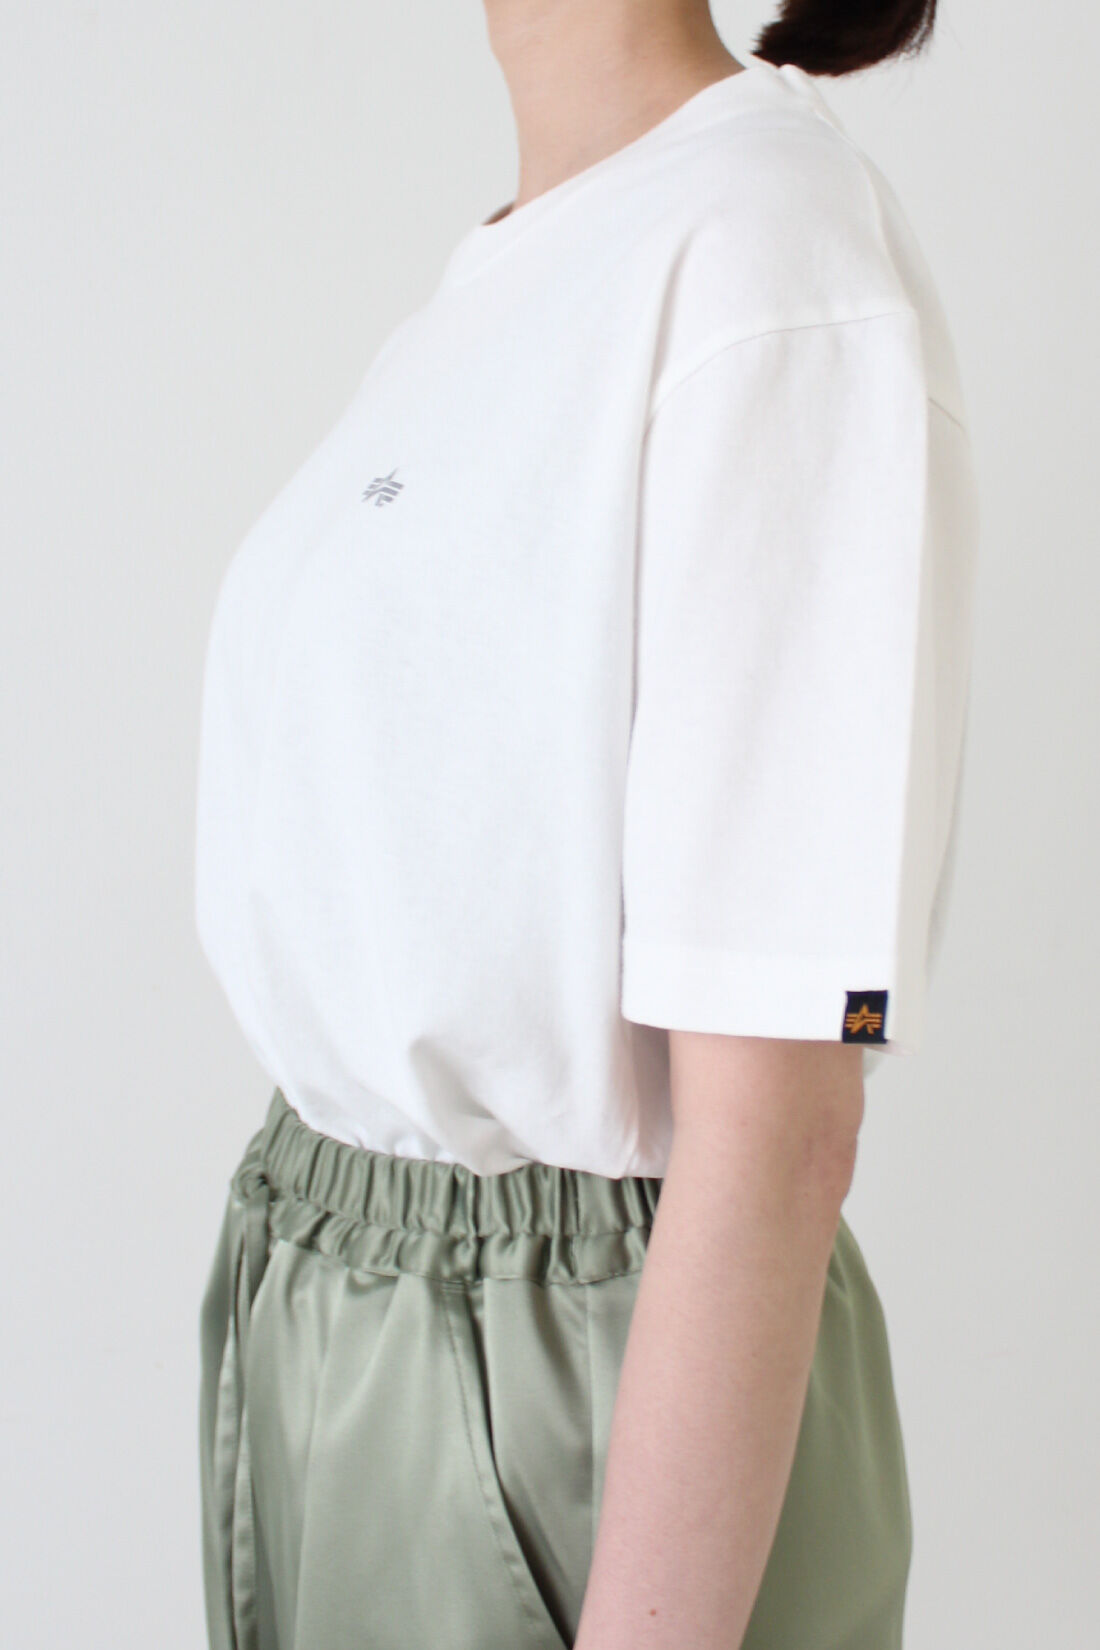 Real Stock|MEDE19F 〈SELECT〉 ALPHA INDUSTRIES　リフレクターバックロゴプリントTシャツ〈WHITE〉